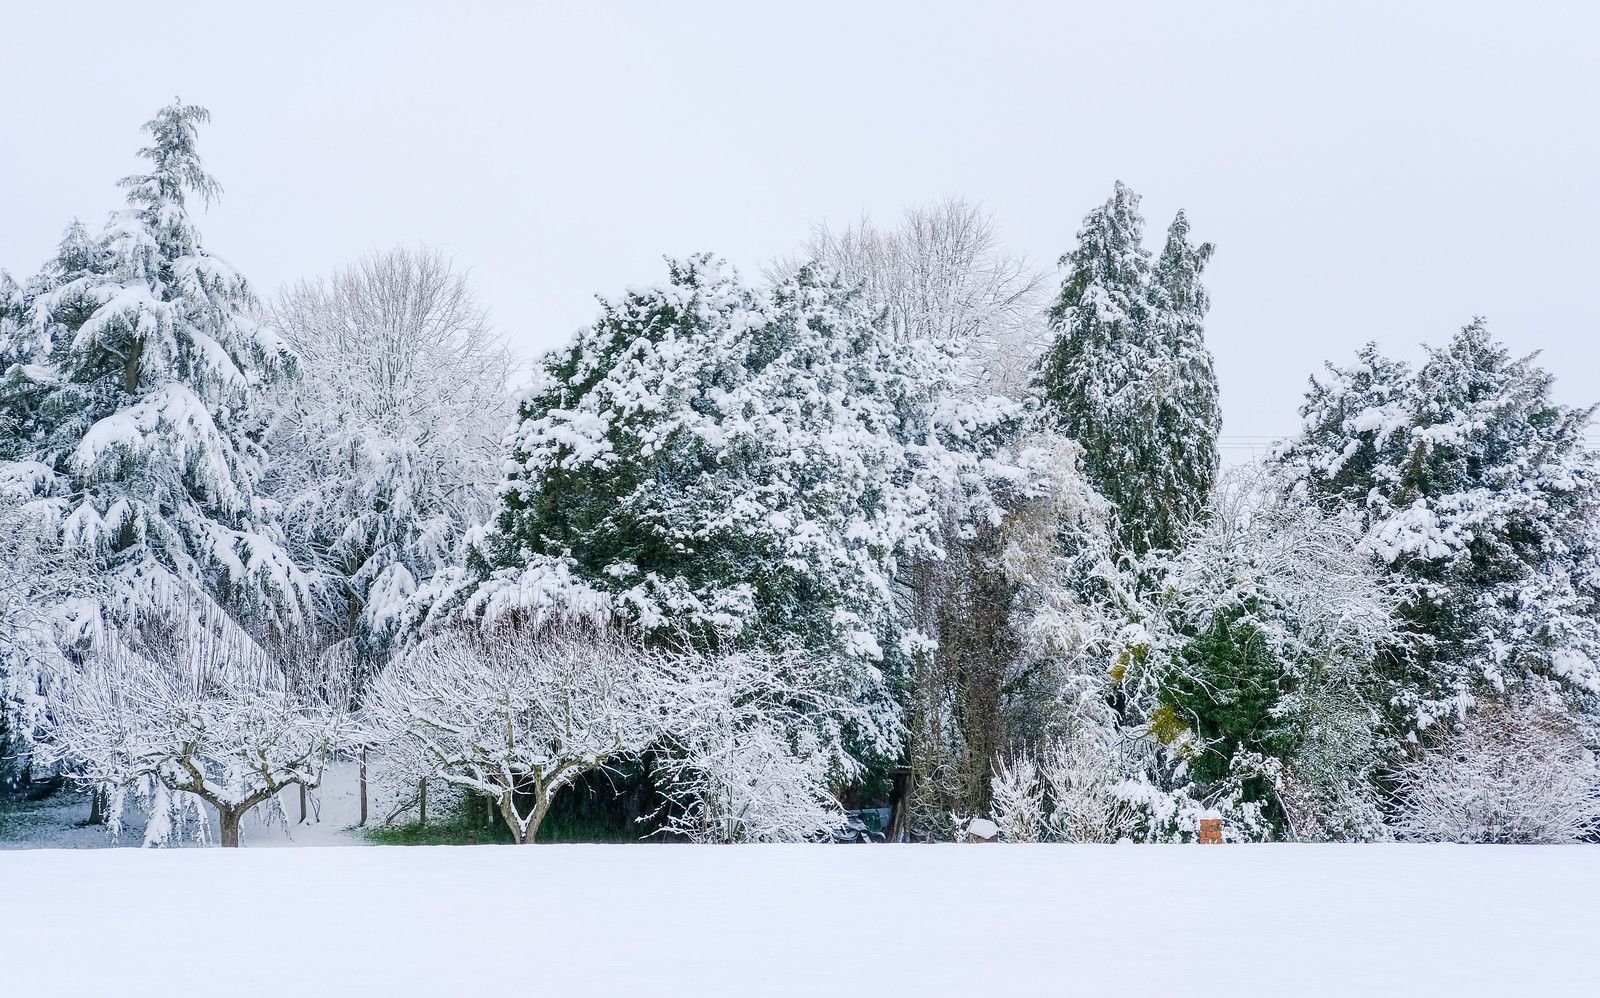 A photo looking across flat snow to about a dozen trees of different sizes and shapes, all covered in snow, with a blank white sky behind them